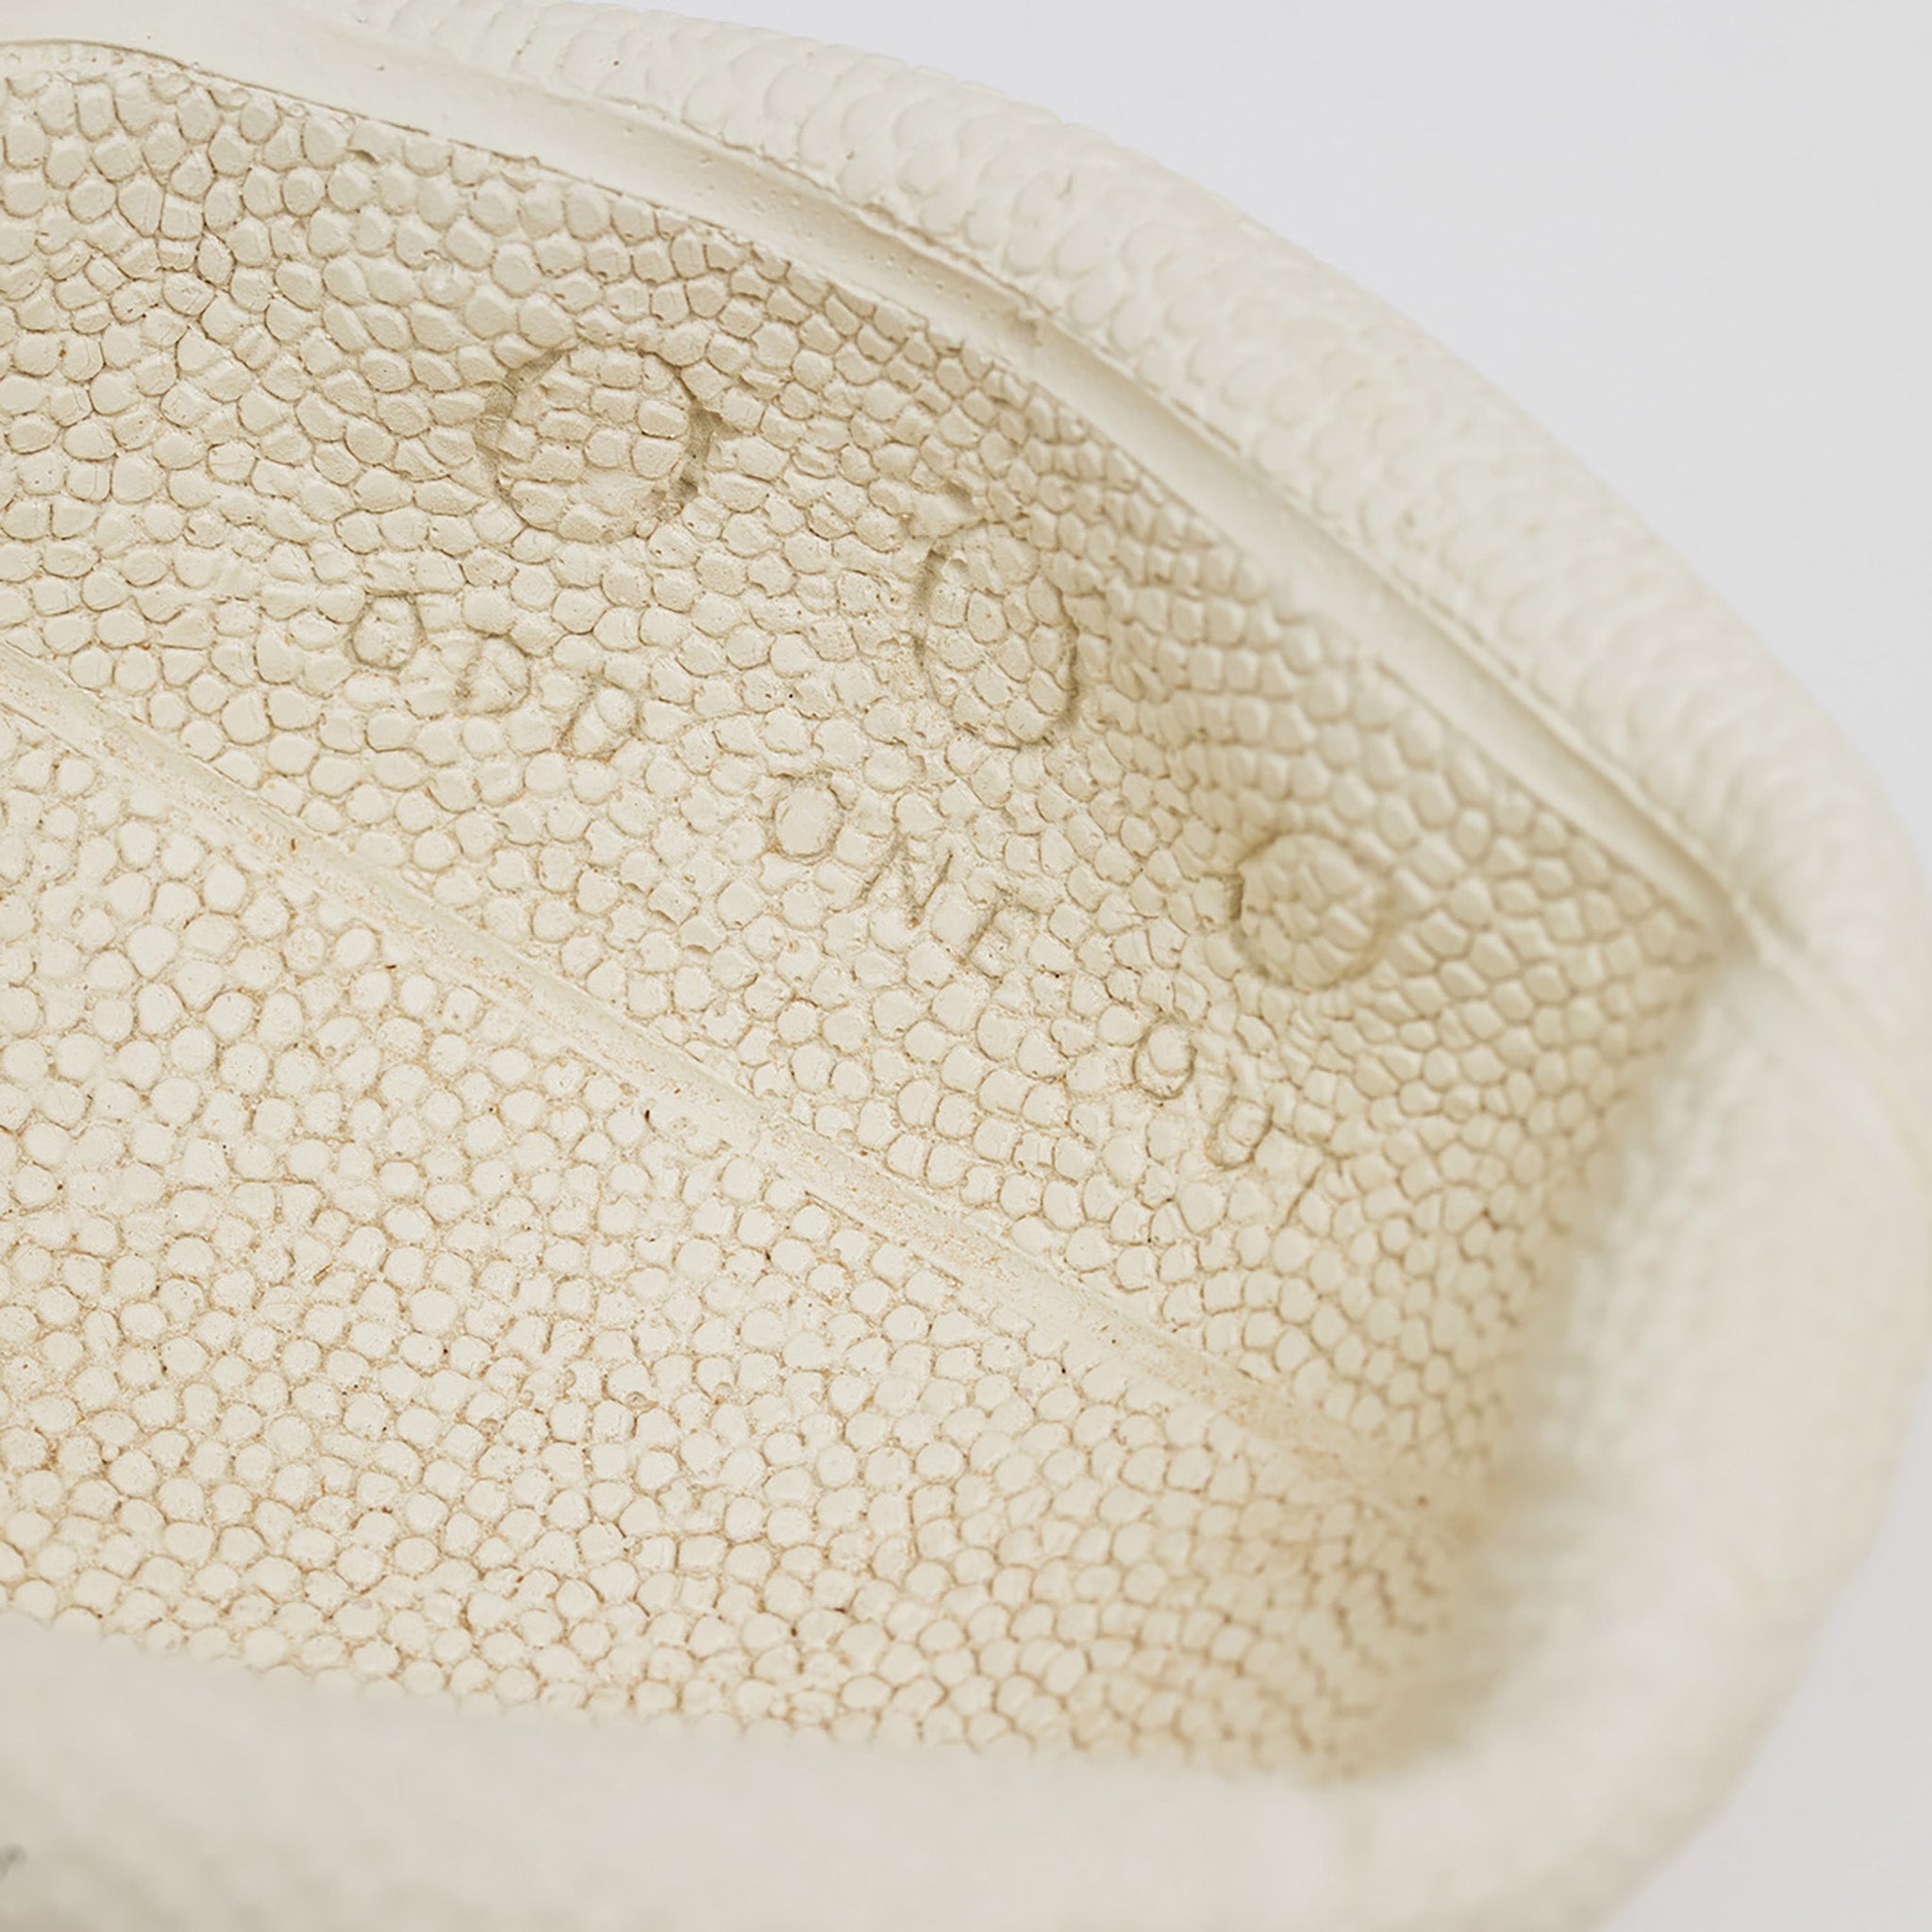 Detail shot of Odd One Out logo in the mini basketball bowl